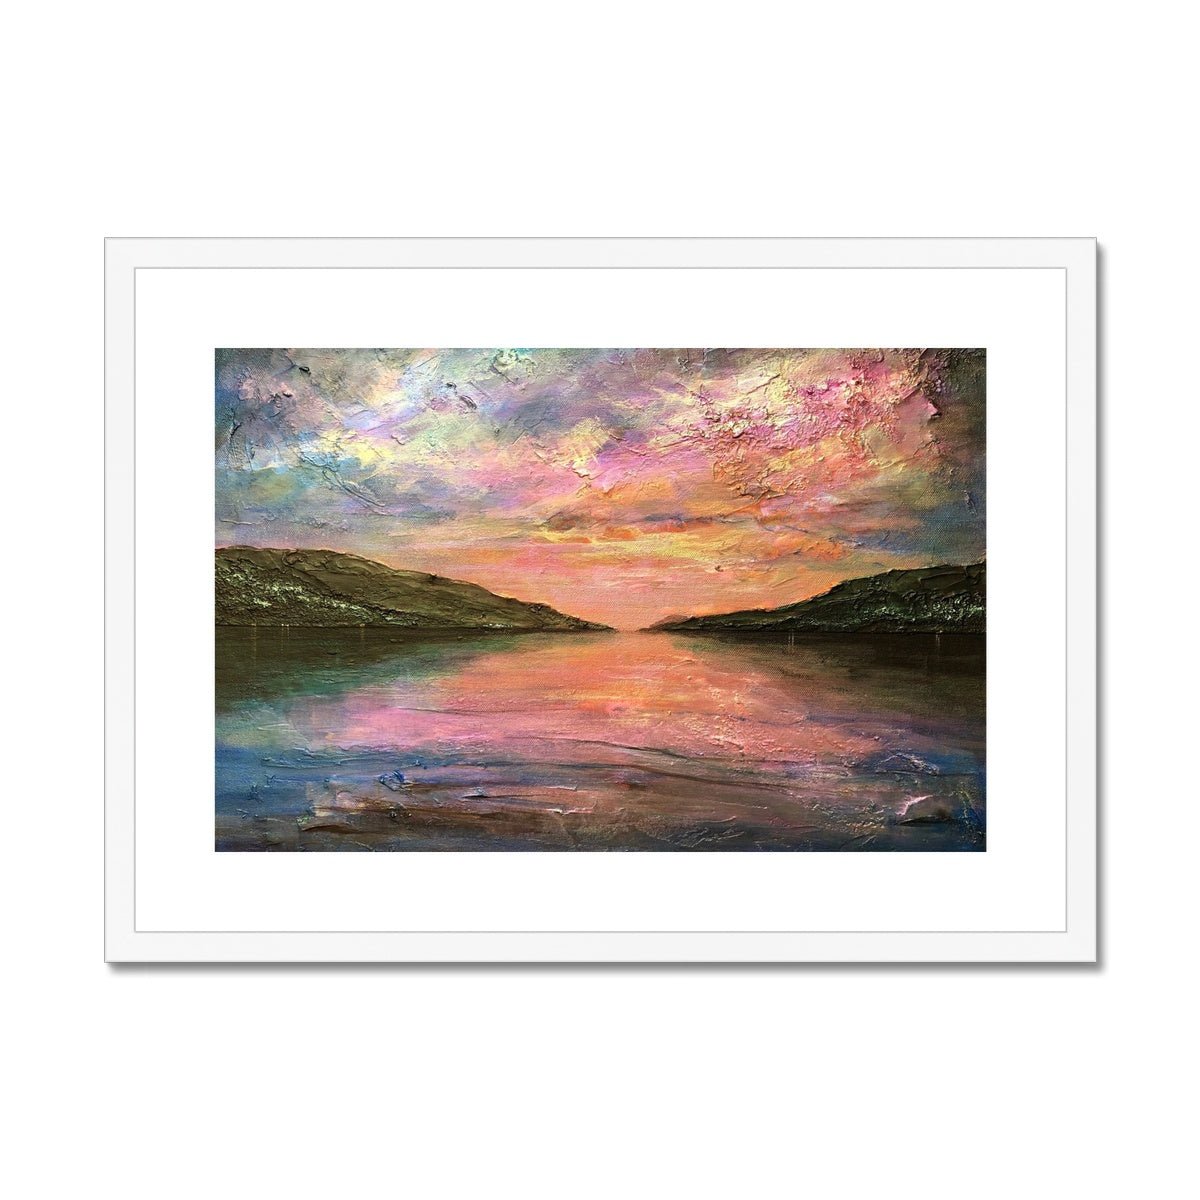 Loch Ness Dawn Painting | Framed & Mounted Prints From Scotland-Framed & Mounted Prints-Scottish Lochs & Mountains Art Gallery-A2 Landscape-White Frame-Paintings, Prints, Homeware, Art Gifts From Scotland By Scottish Artist Kevin Hunter